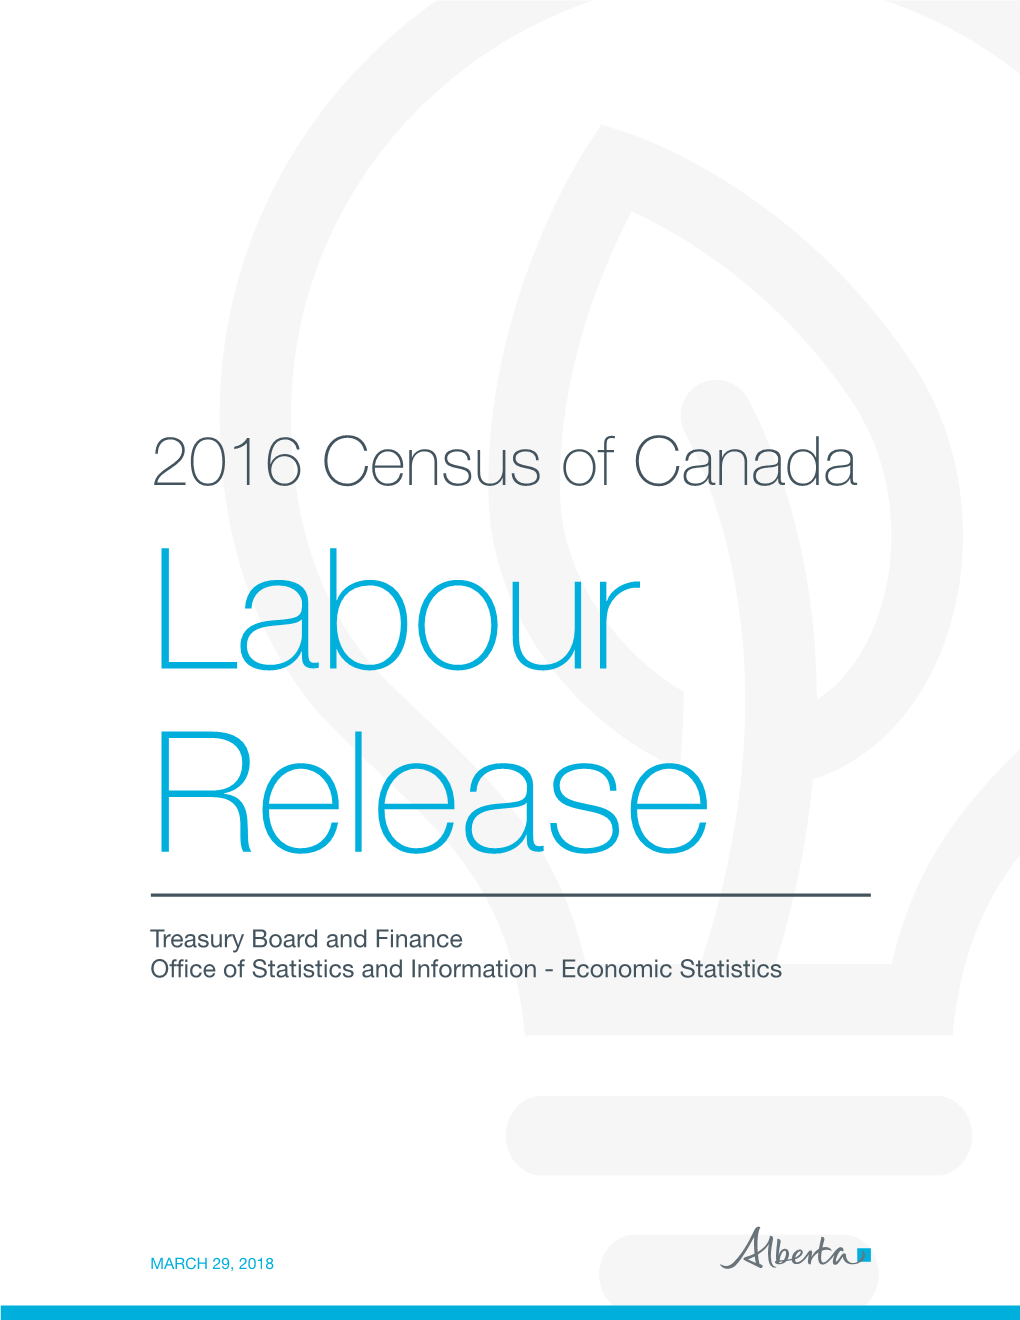 2016 Census of Canada Highlights